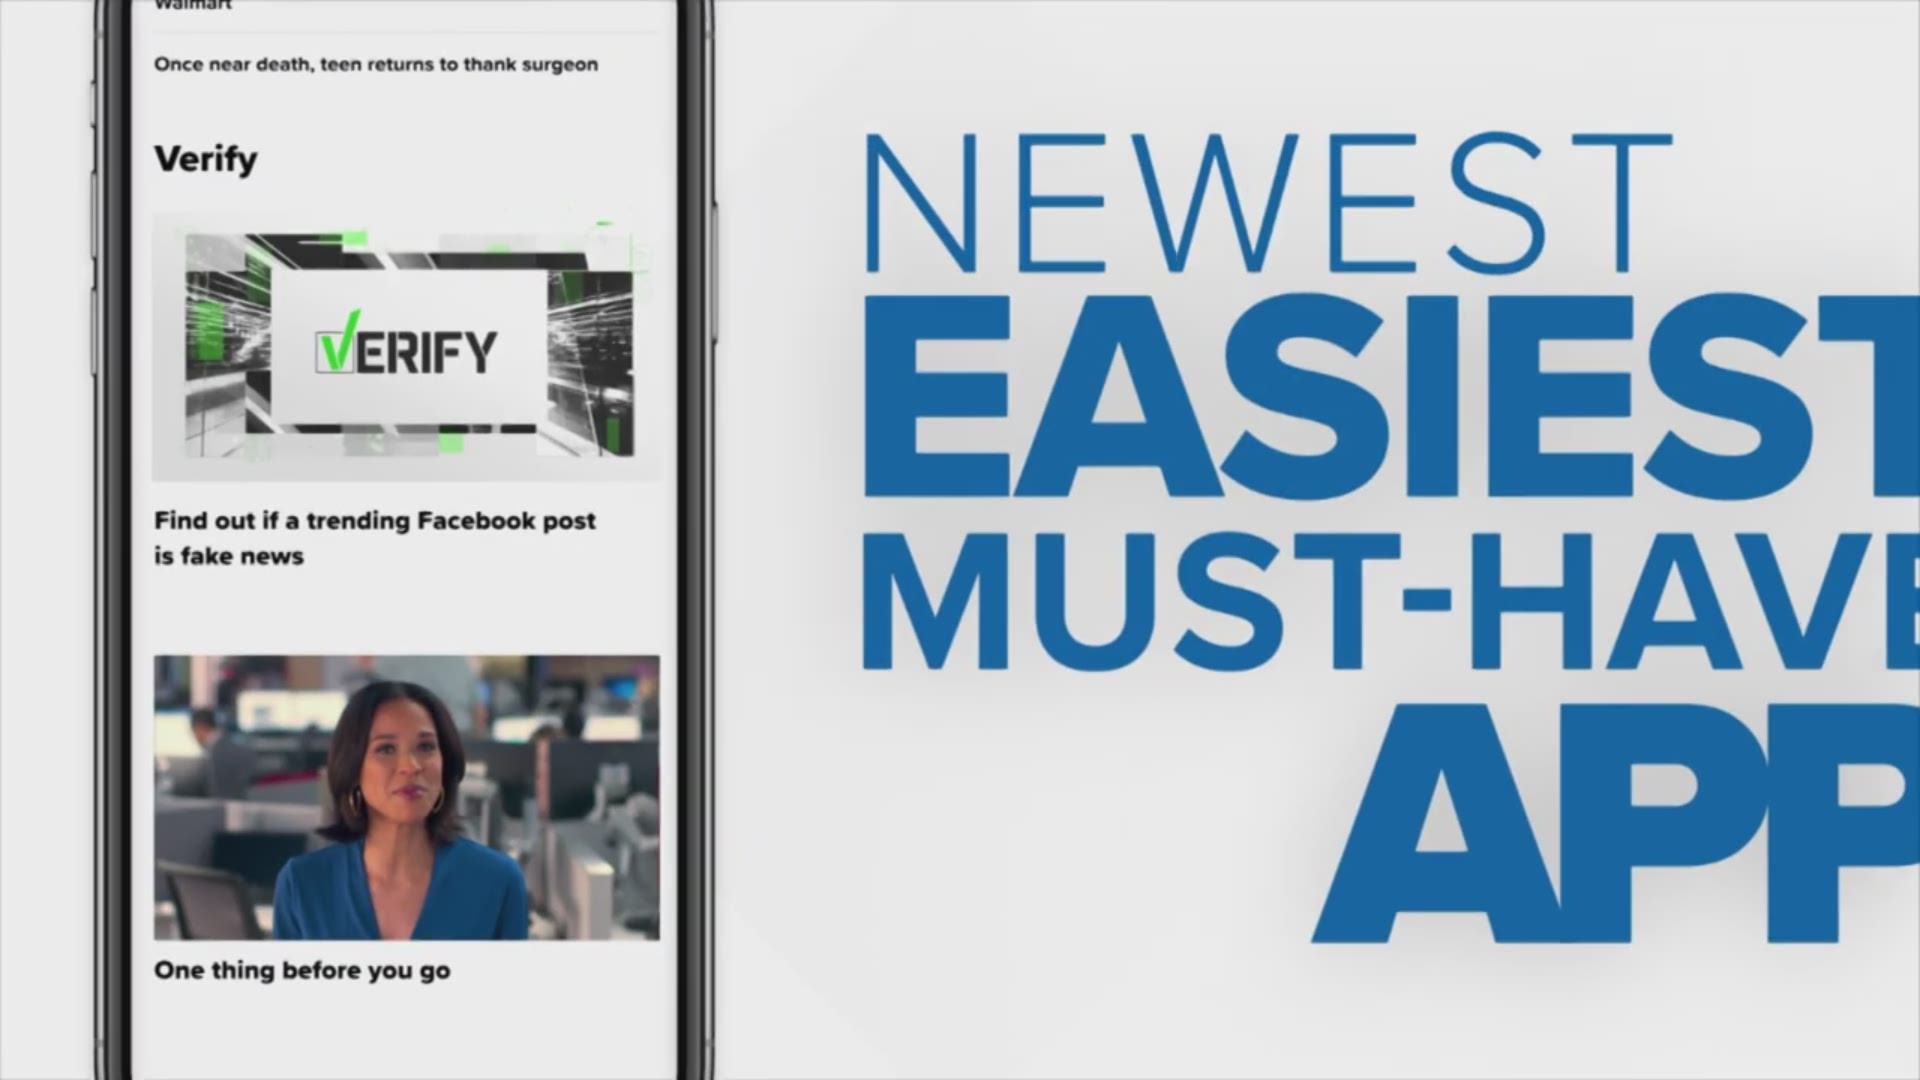 It's your news when you want it! Customizable push alerts and more video.  Download it now!